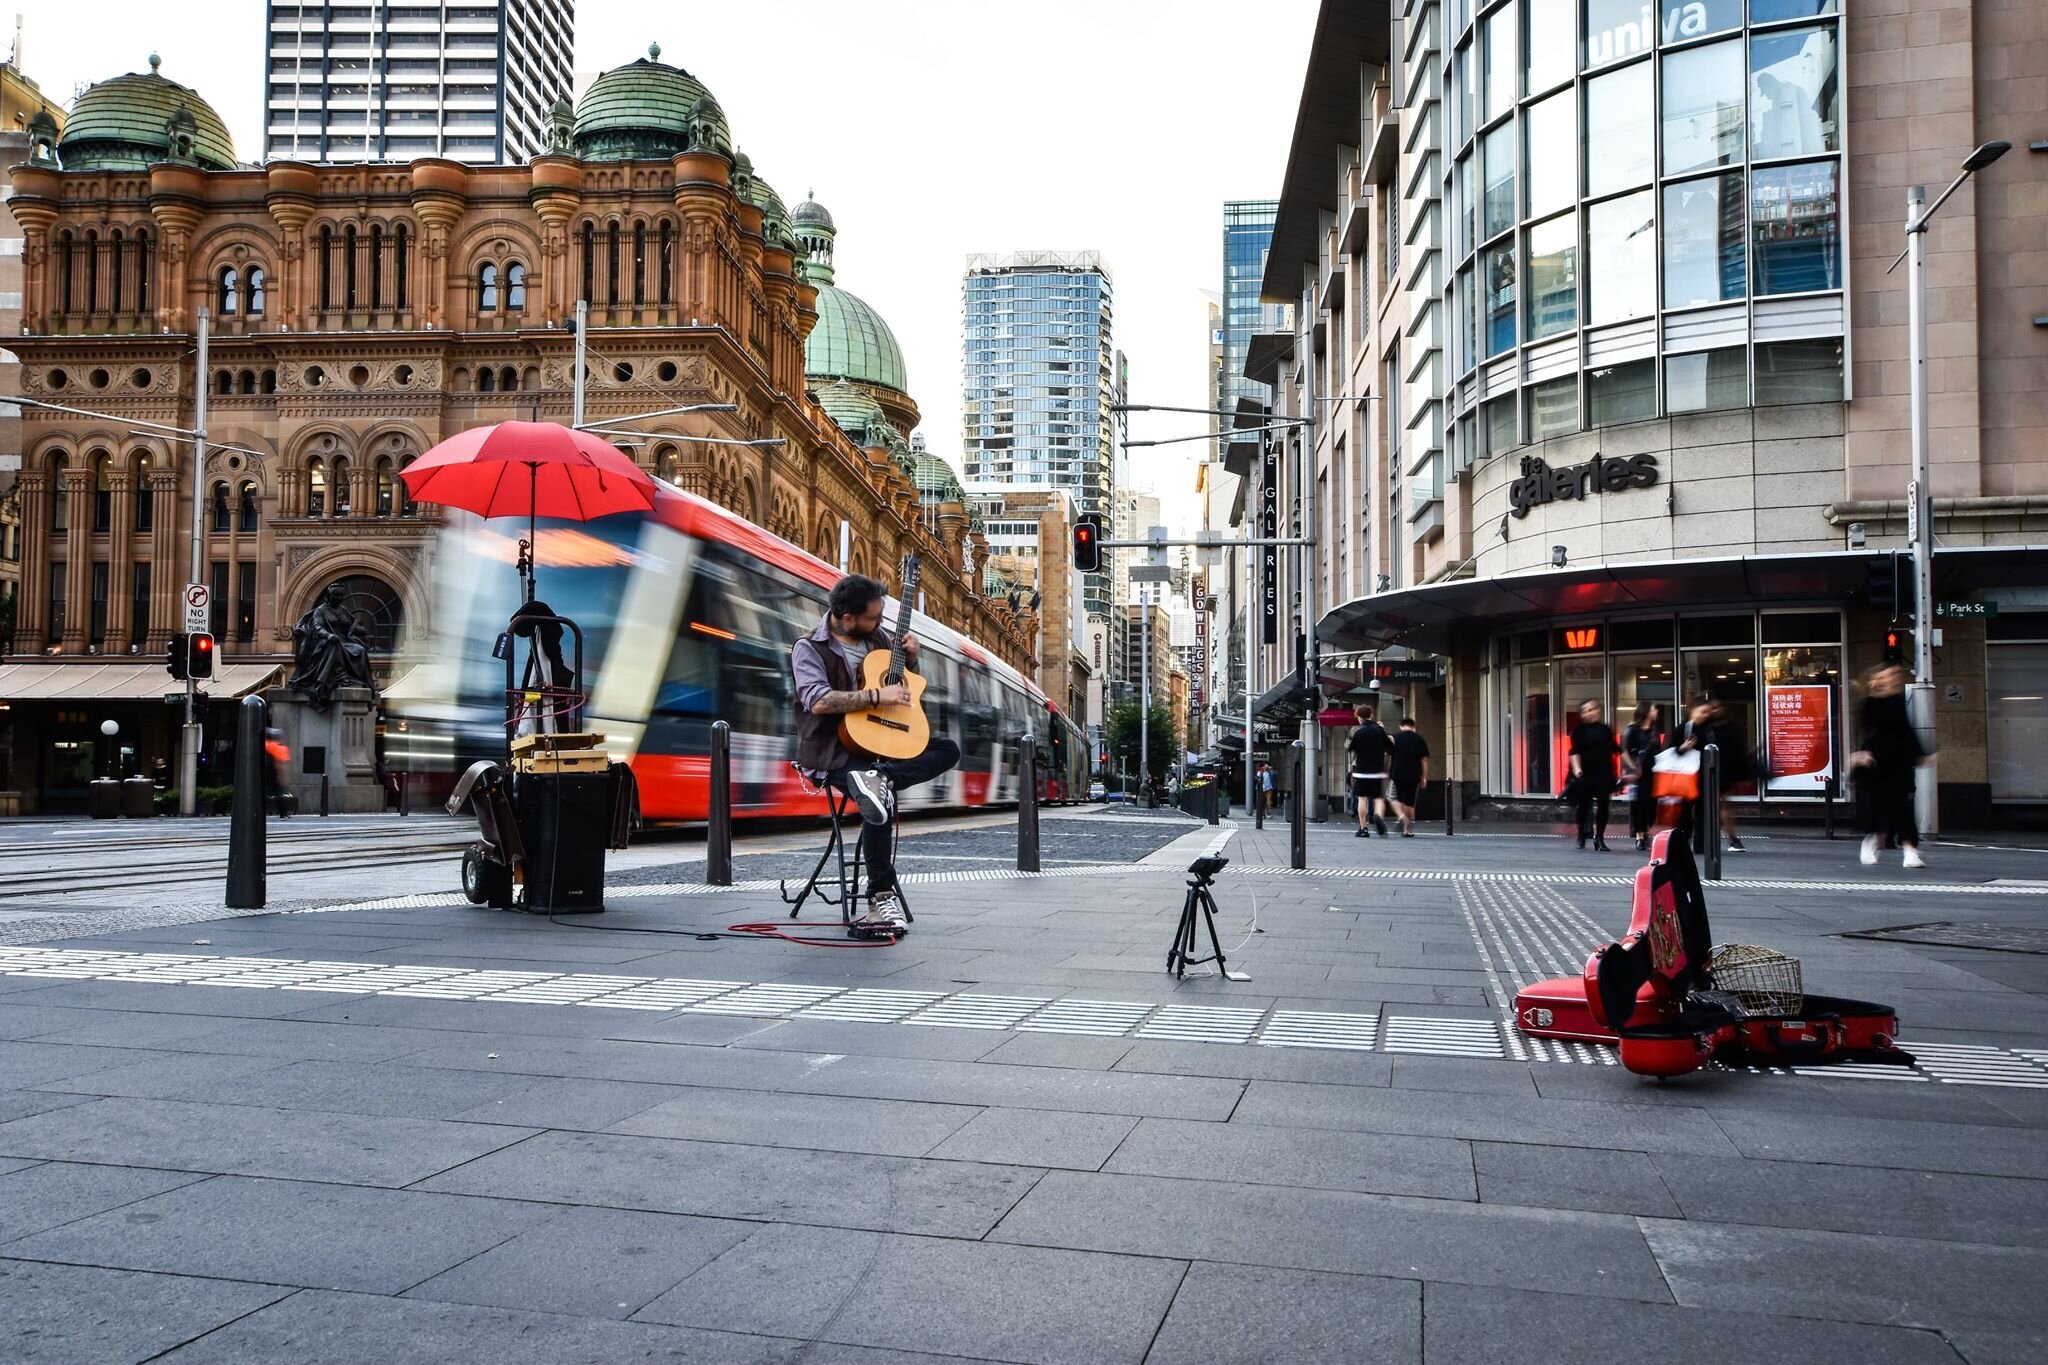 Back in the heart of the city the heave of people has become a trickle. Some buskers brave the bare streets to buoy the passers-by. Picture: Mark Kriedemann/Trademark Photography